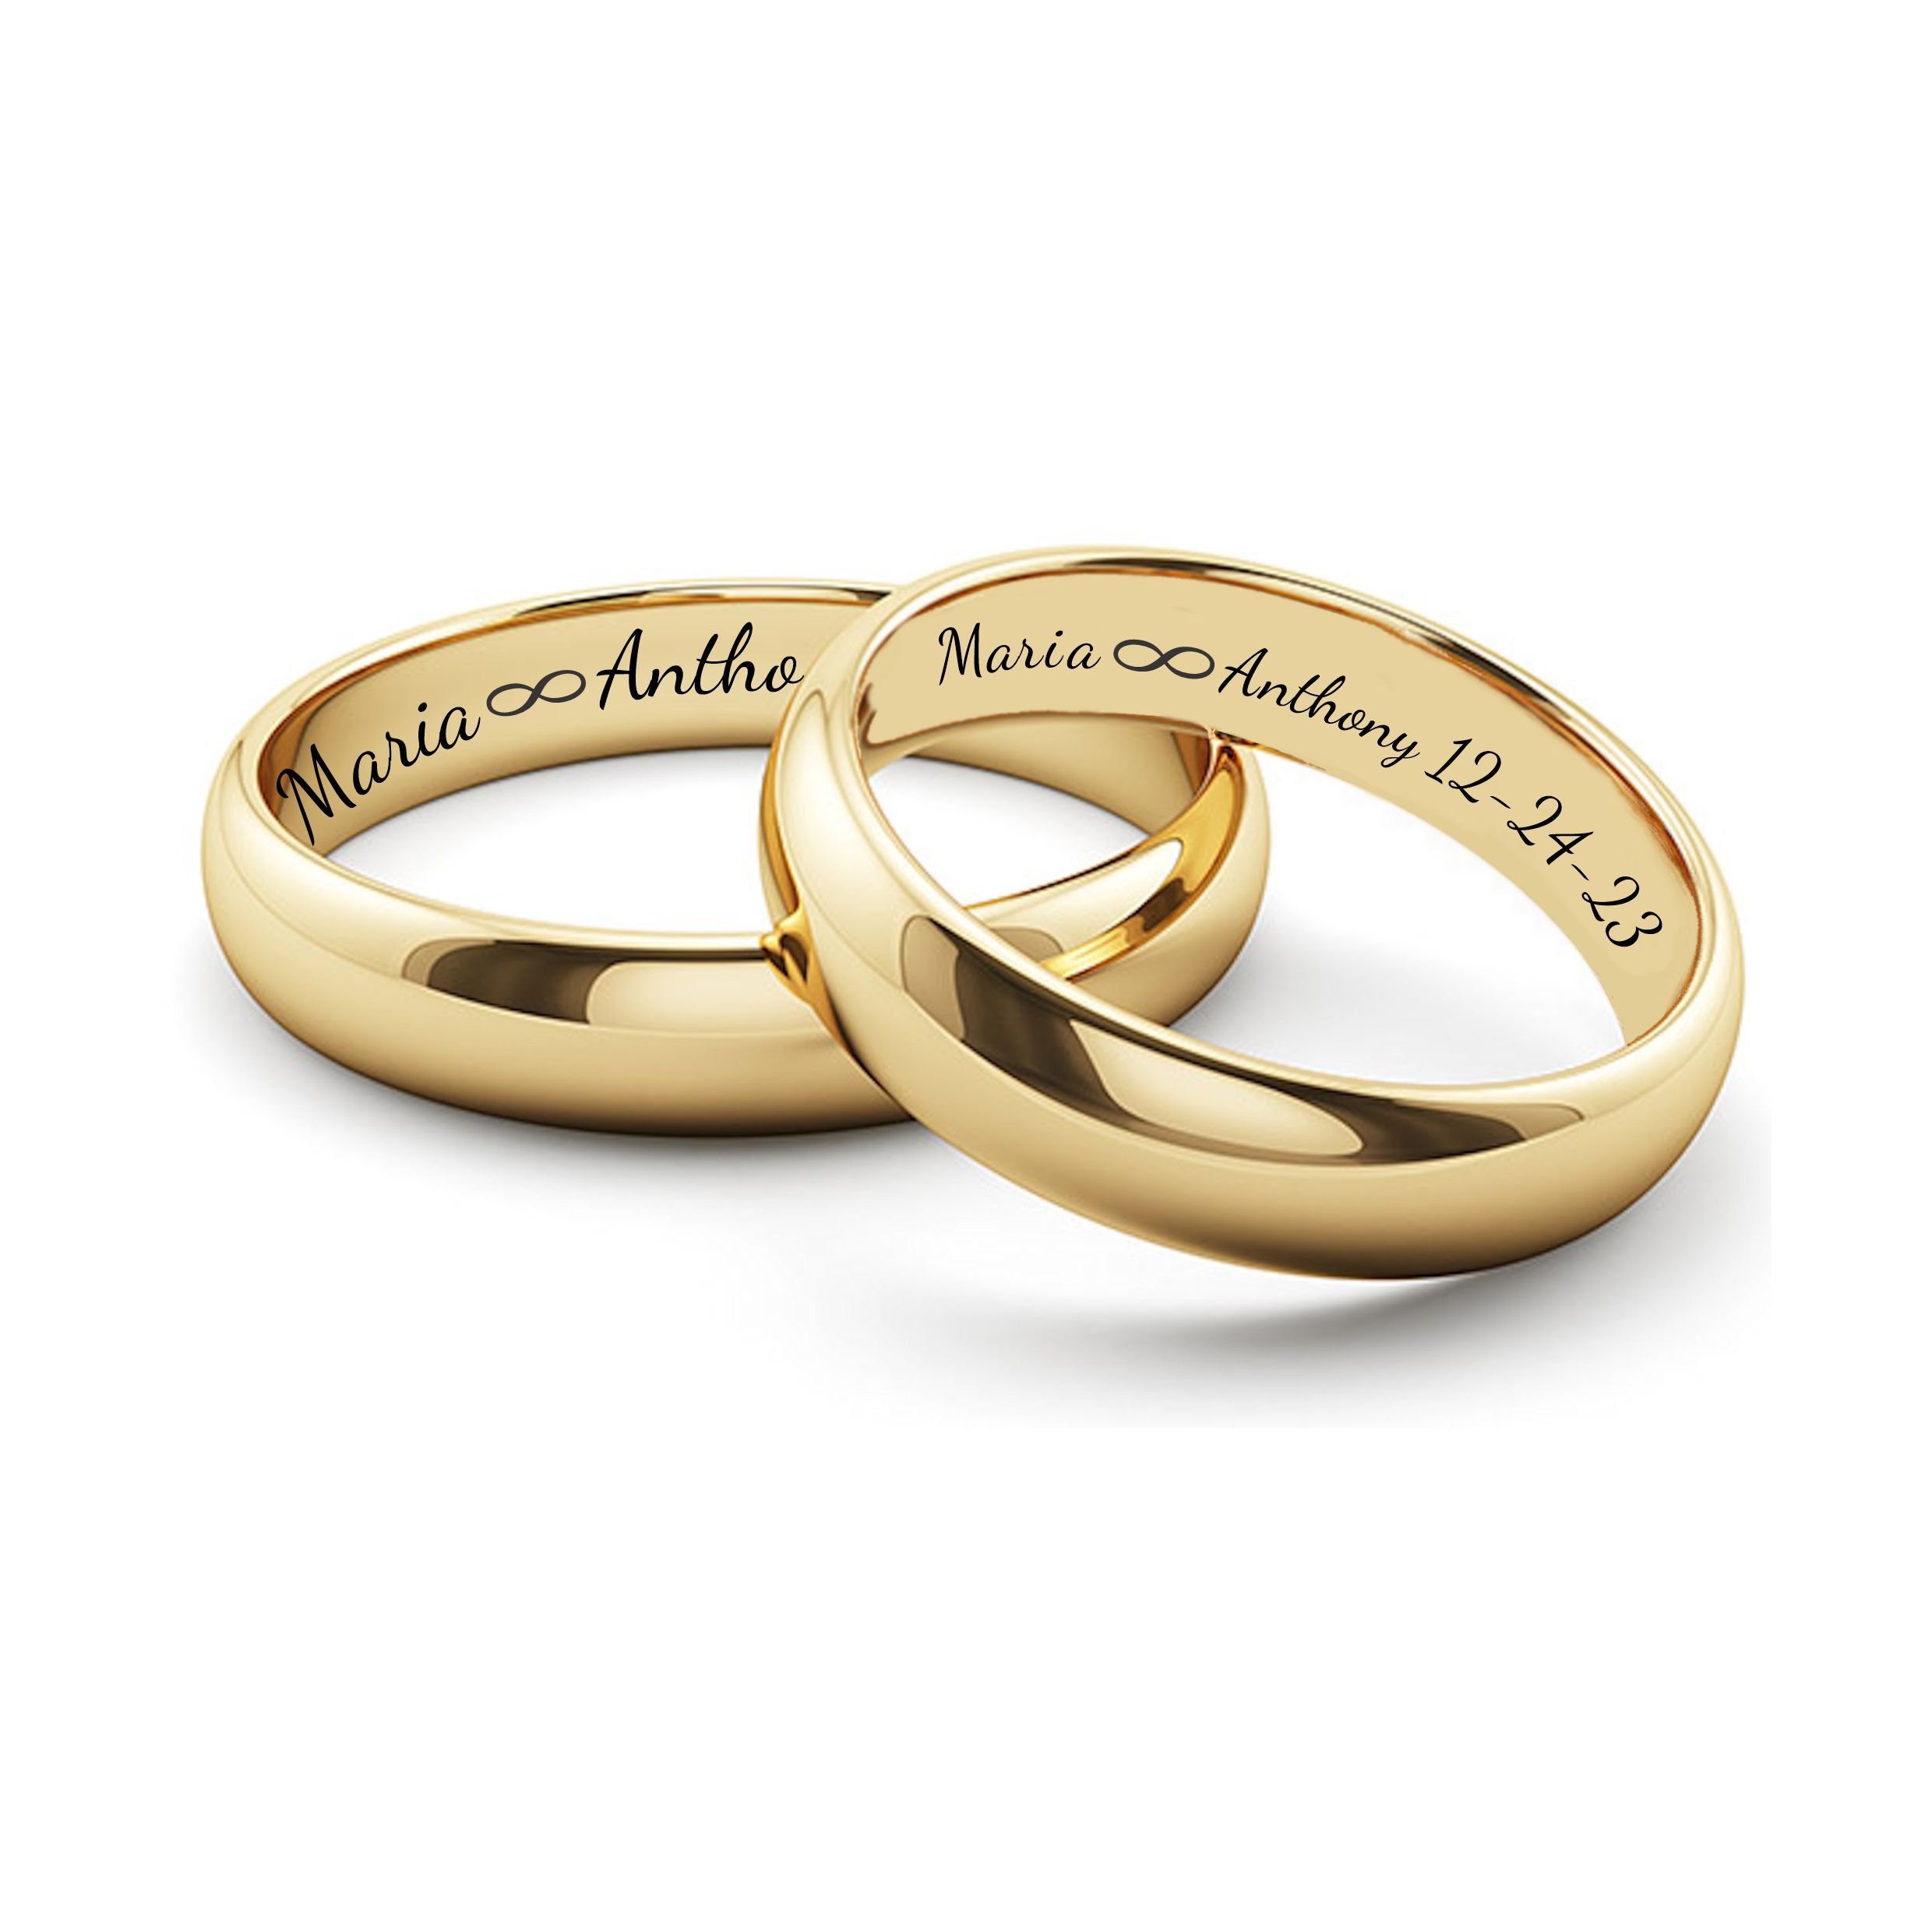 Personalized Gold Ring Set Custom Engraved Rings Stainless Steel Gold  Wedding Band Promise Rings for Couples His & Hers Ring Set Comfort Fit -  Etsy